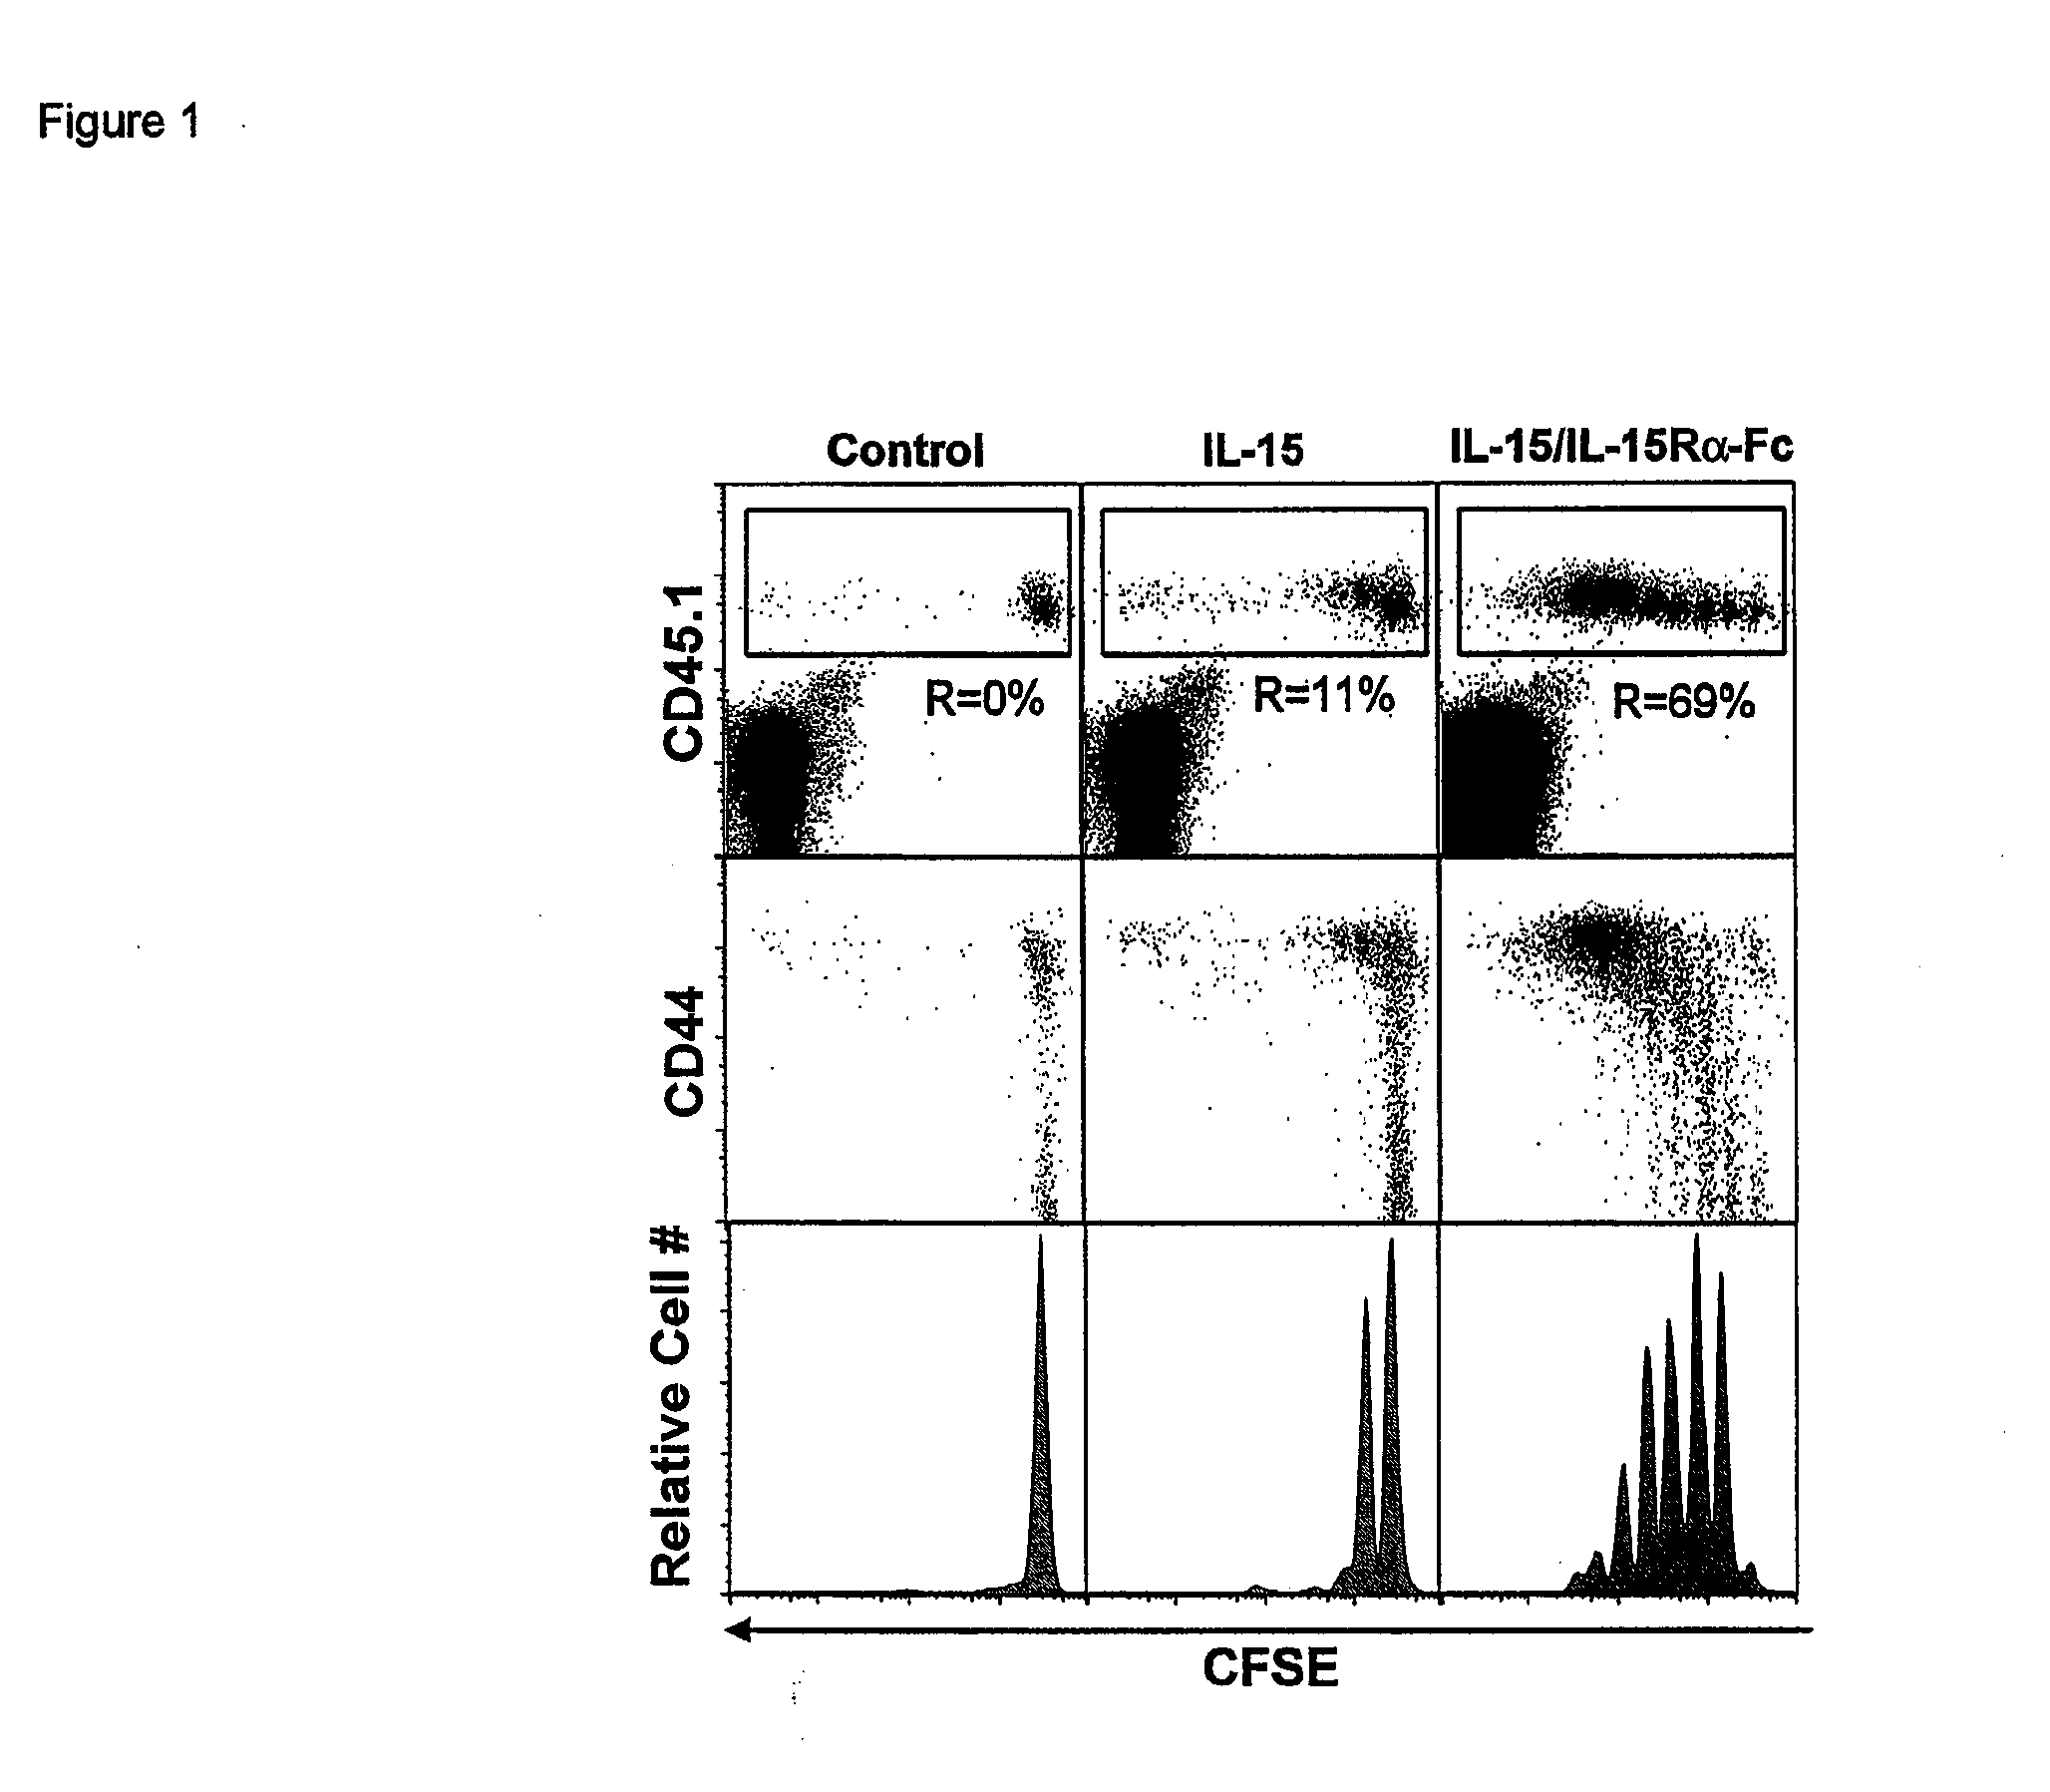 Compositions and Methods for Immunomodulation in an Organism